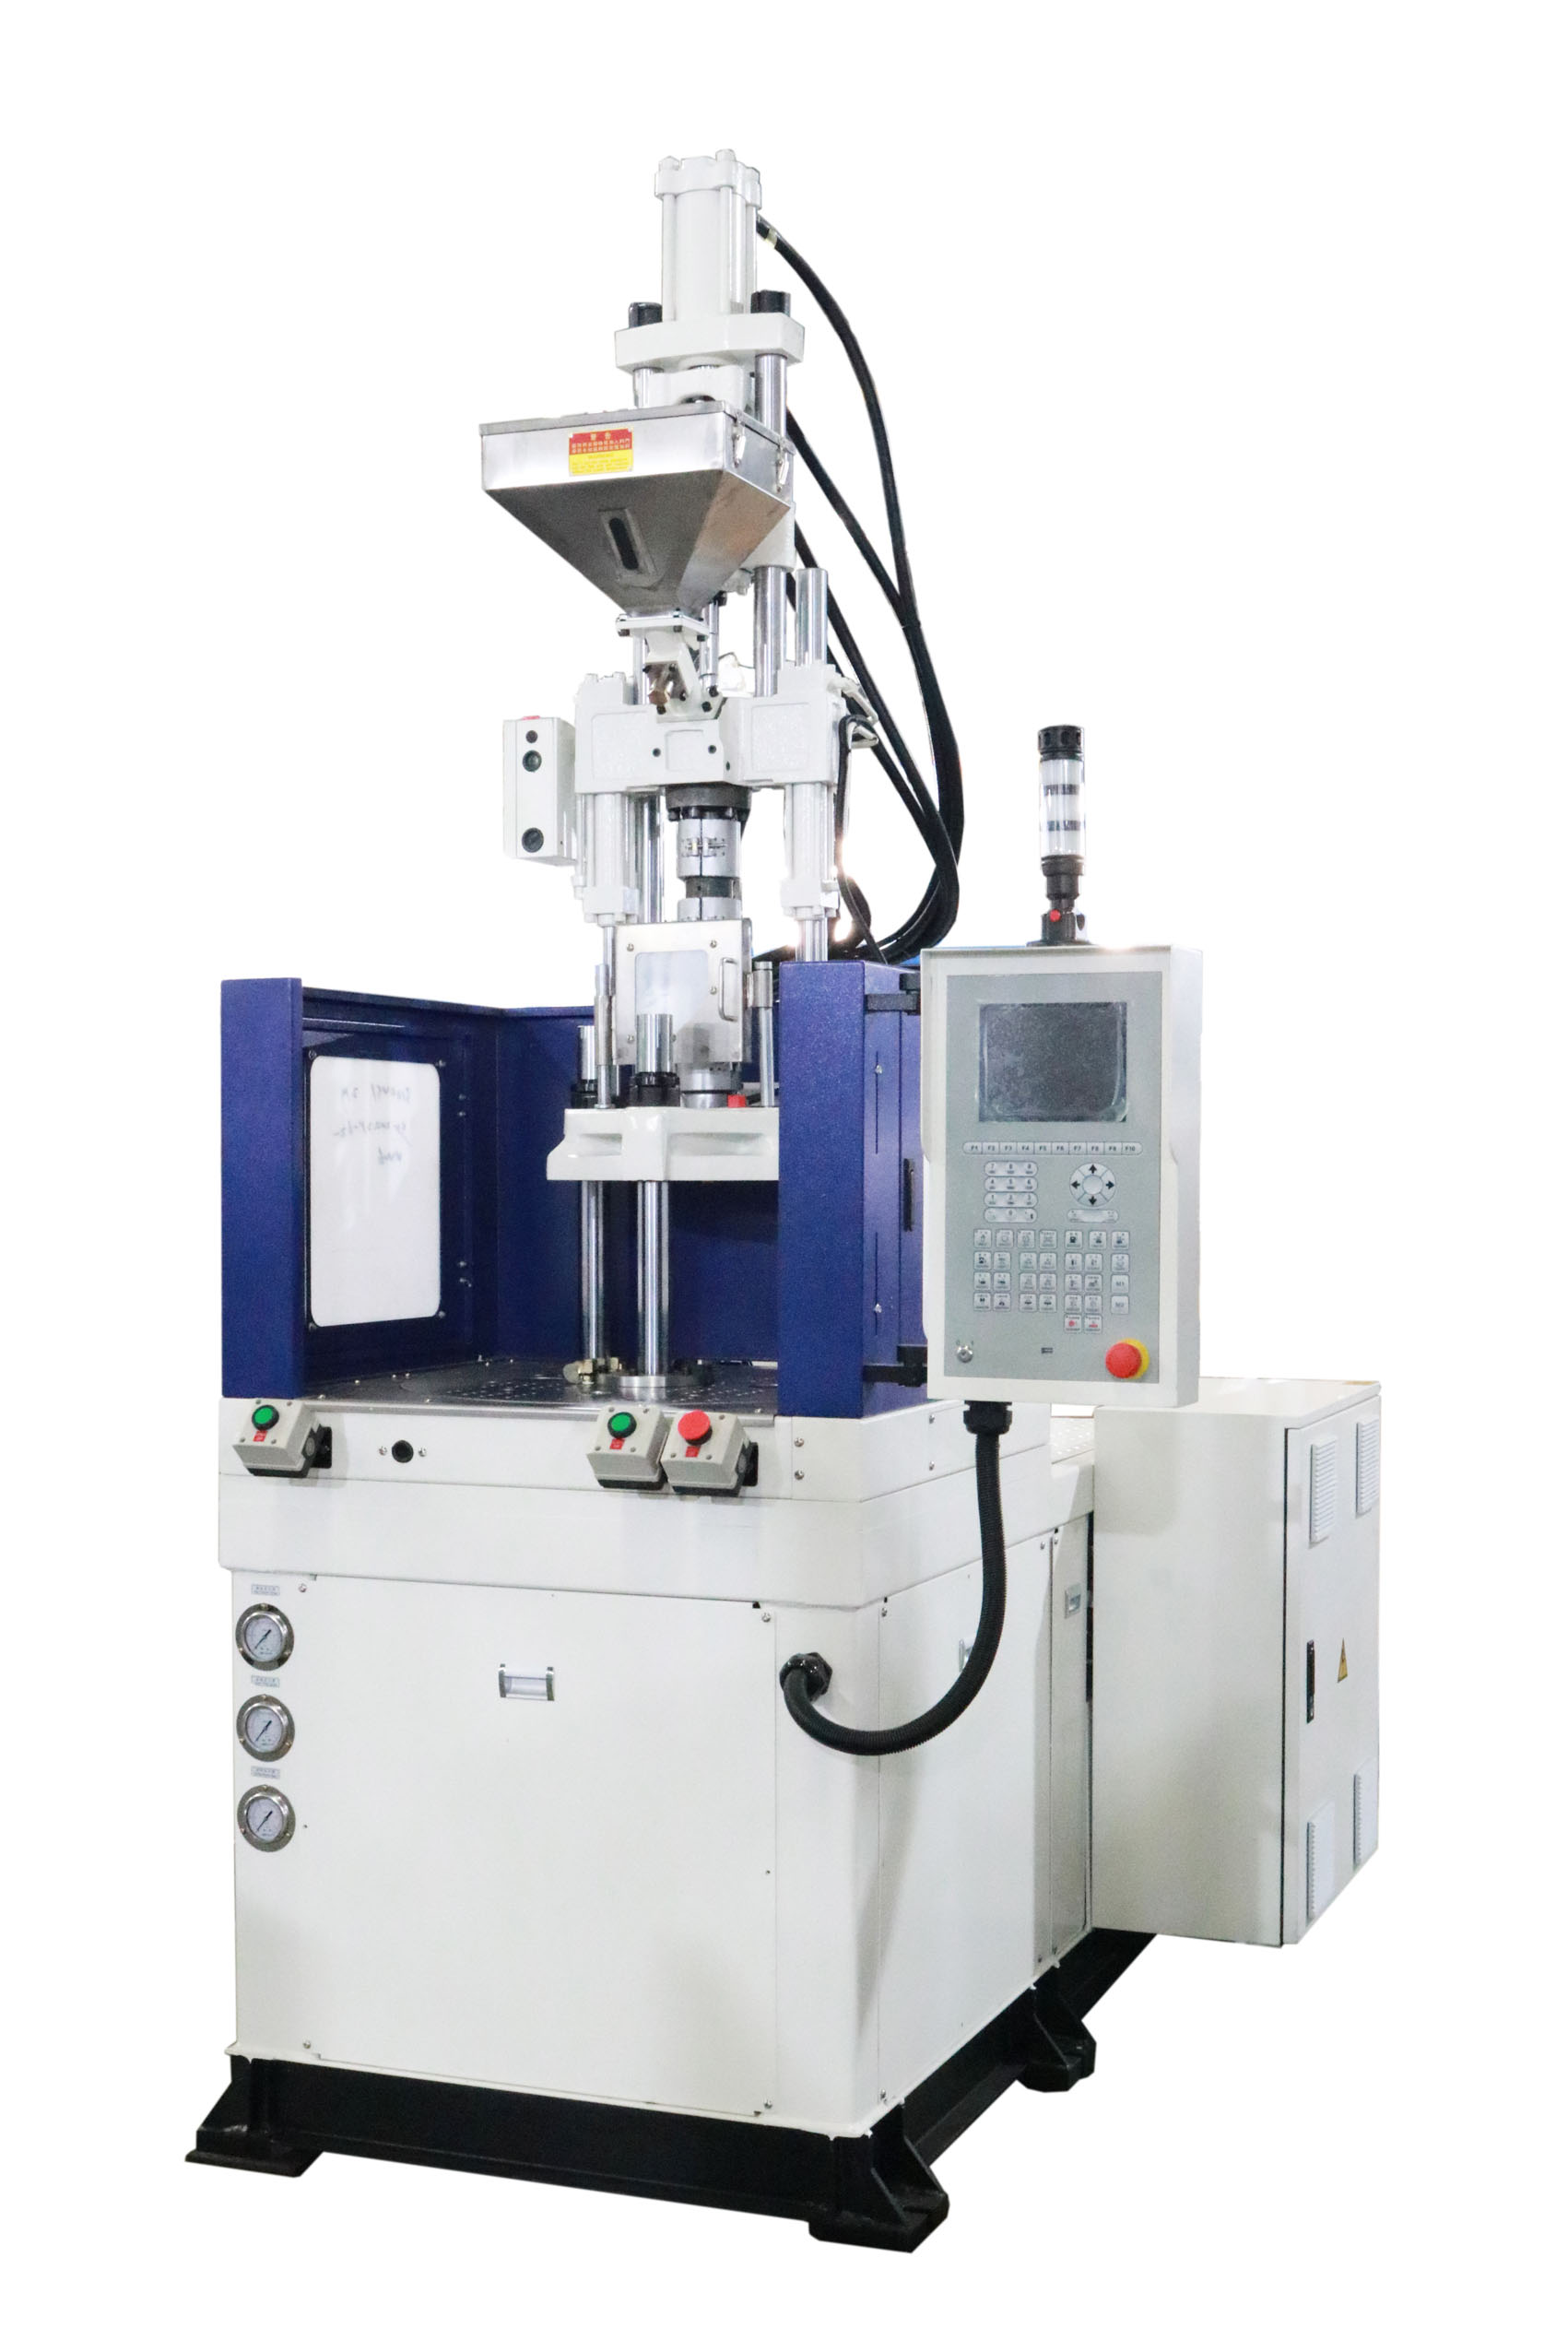 TY-200.2R-1 vertical injection molding machine